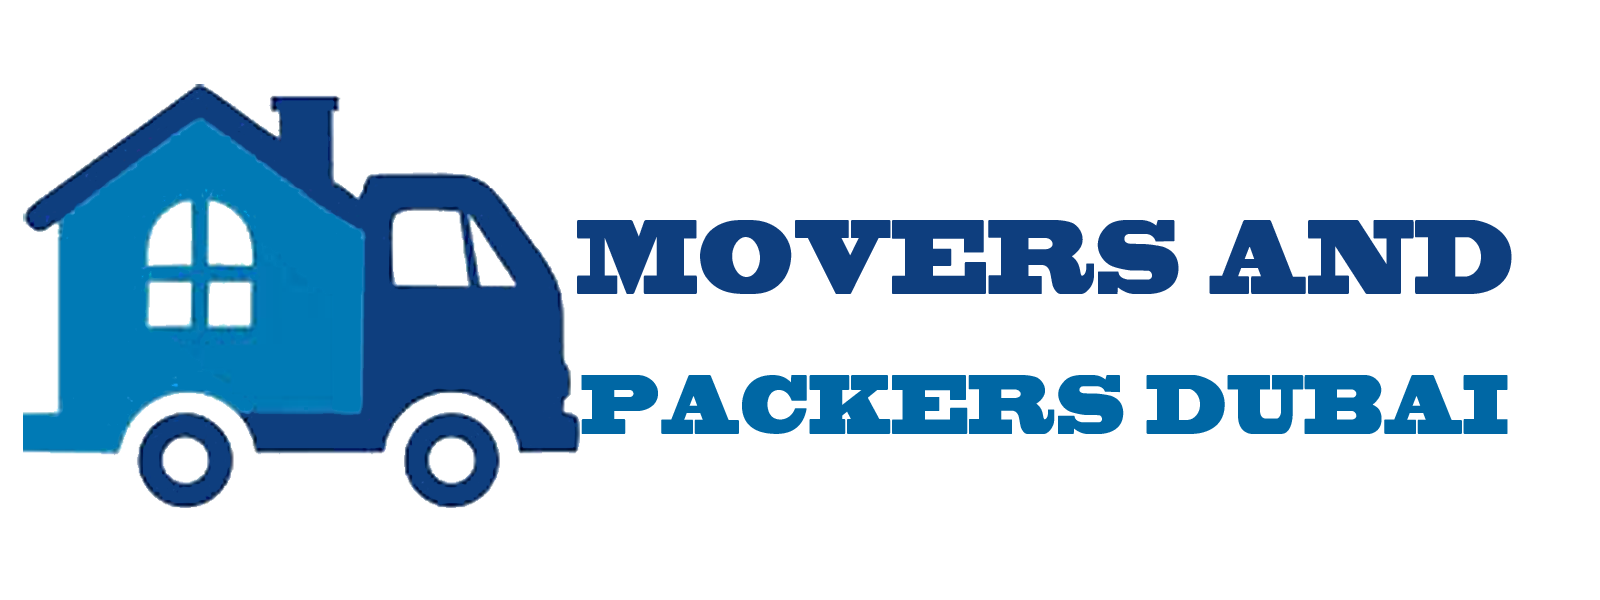 A.B Home Movers In Discovery Gardens 0502472546